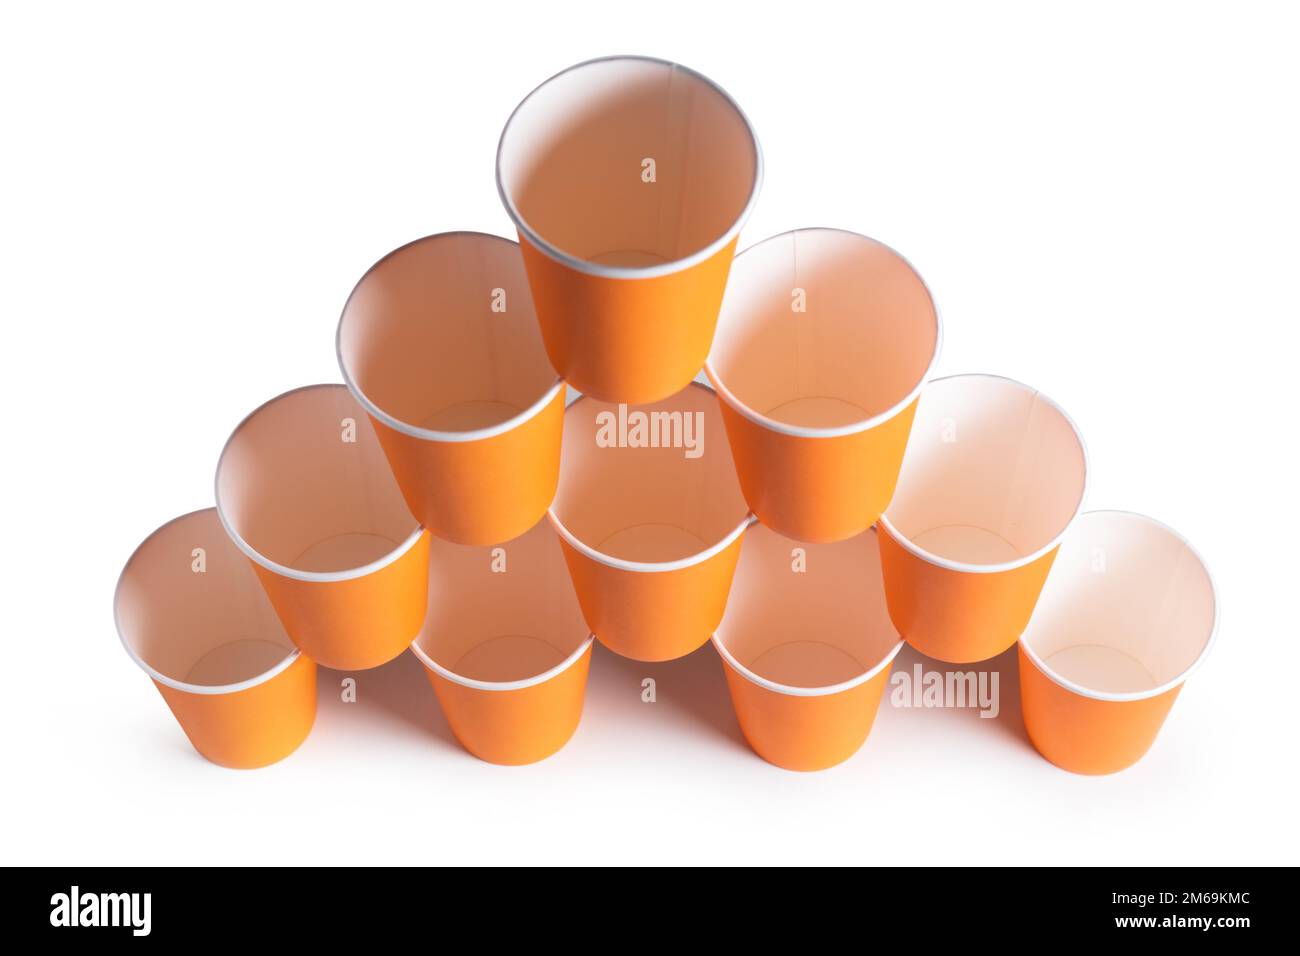 Pyramid of orange disposable paper cups isolated on white background. Stock Photo